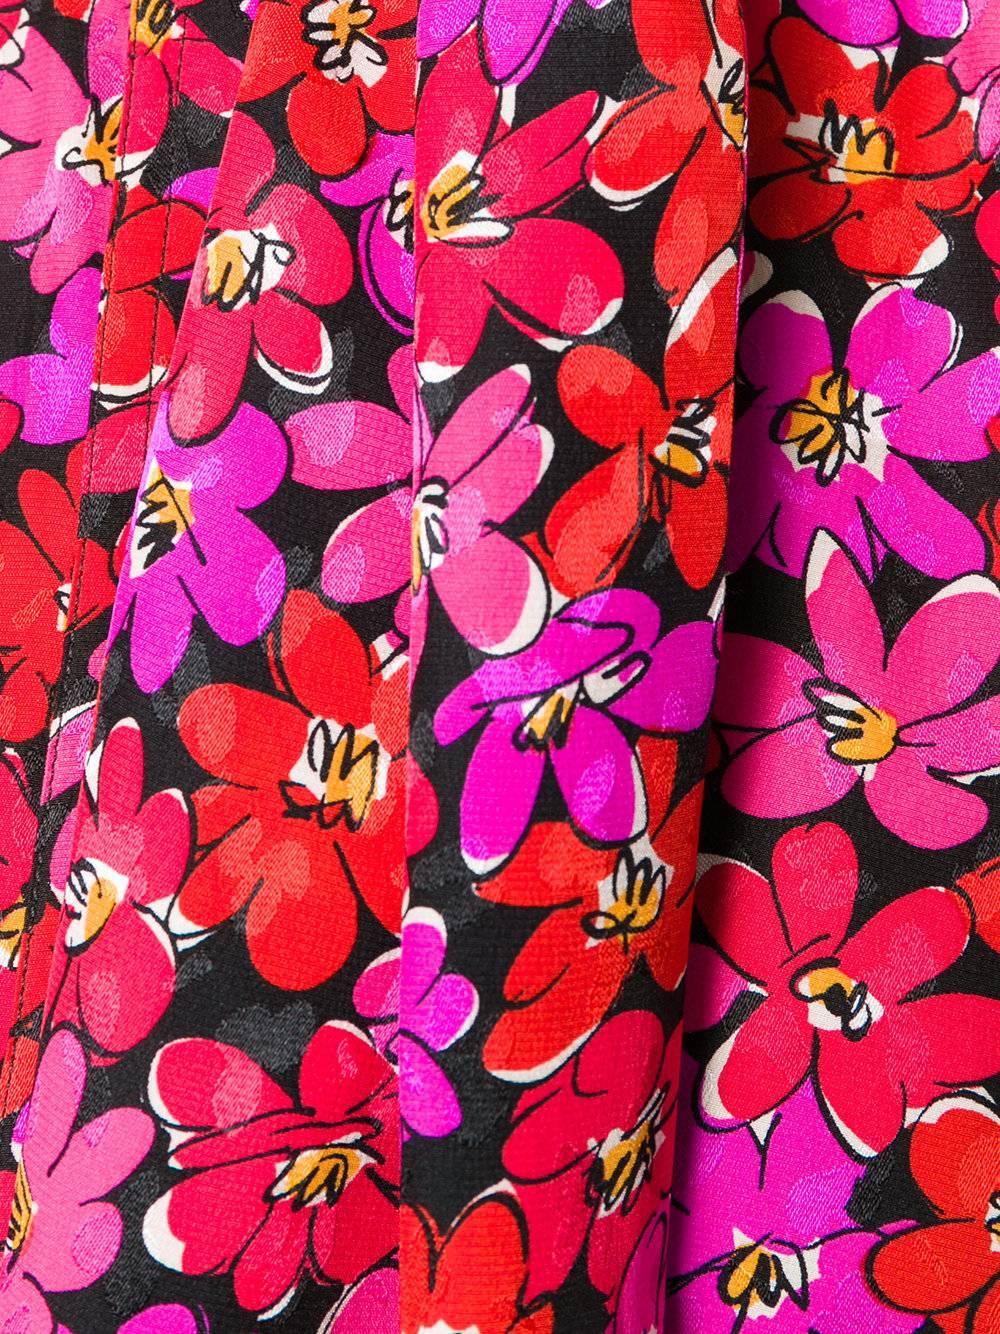 This Yves Saint Laurent silk blouse is decorated with a lively floral print. Shaded in tones of pink, purple and red for an effect that is utterly feminine.

Colour: Black, Red, Purple, Pink

Material: Silk 100%

Size: 38 FR / 42 IT / 10 UK / 4 - 6